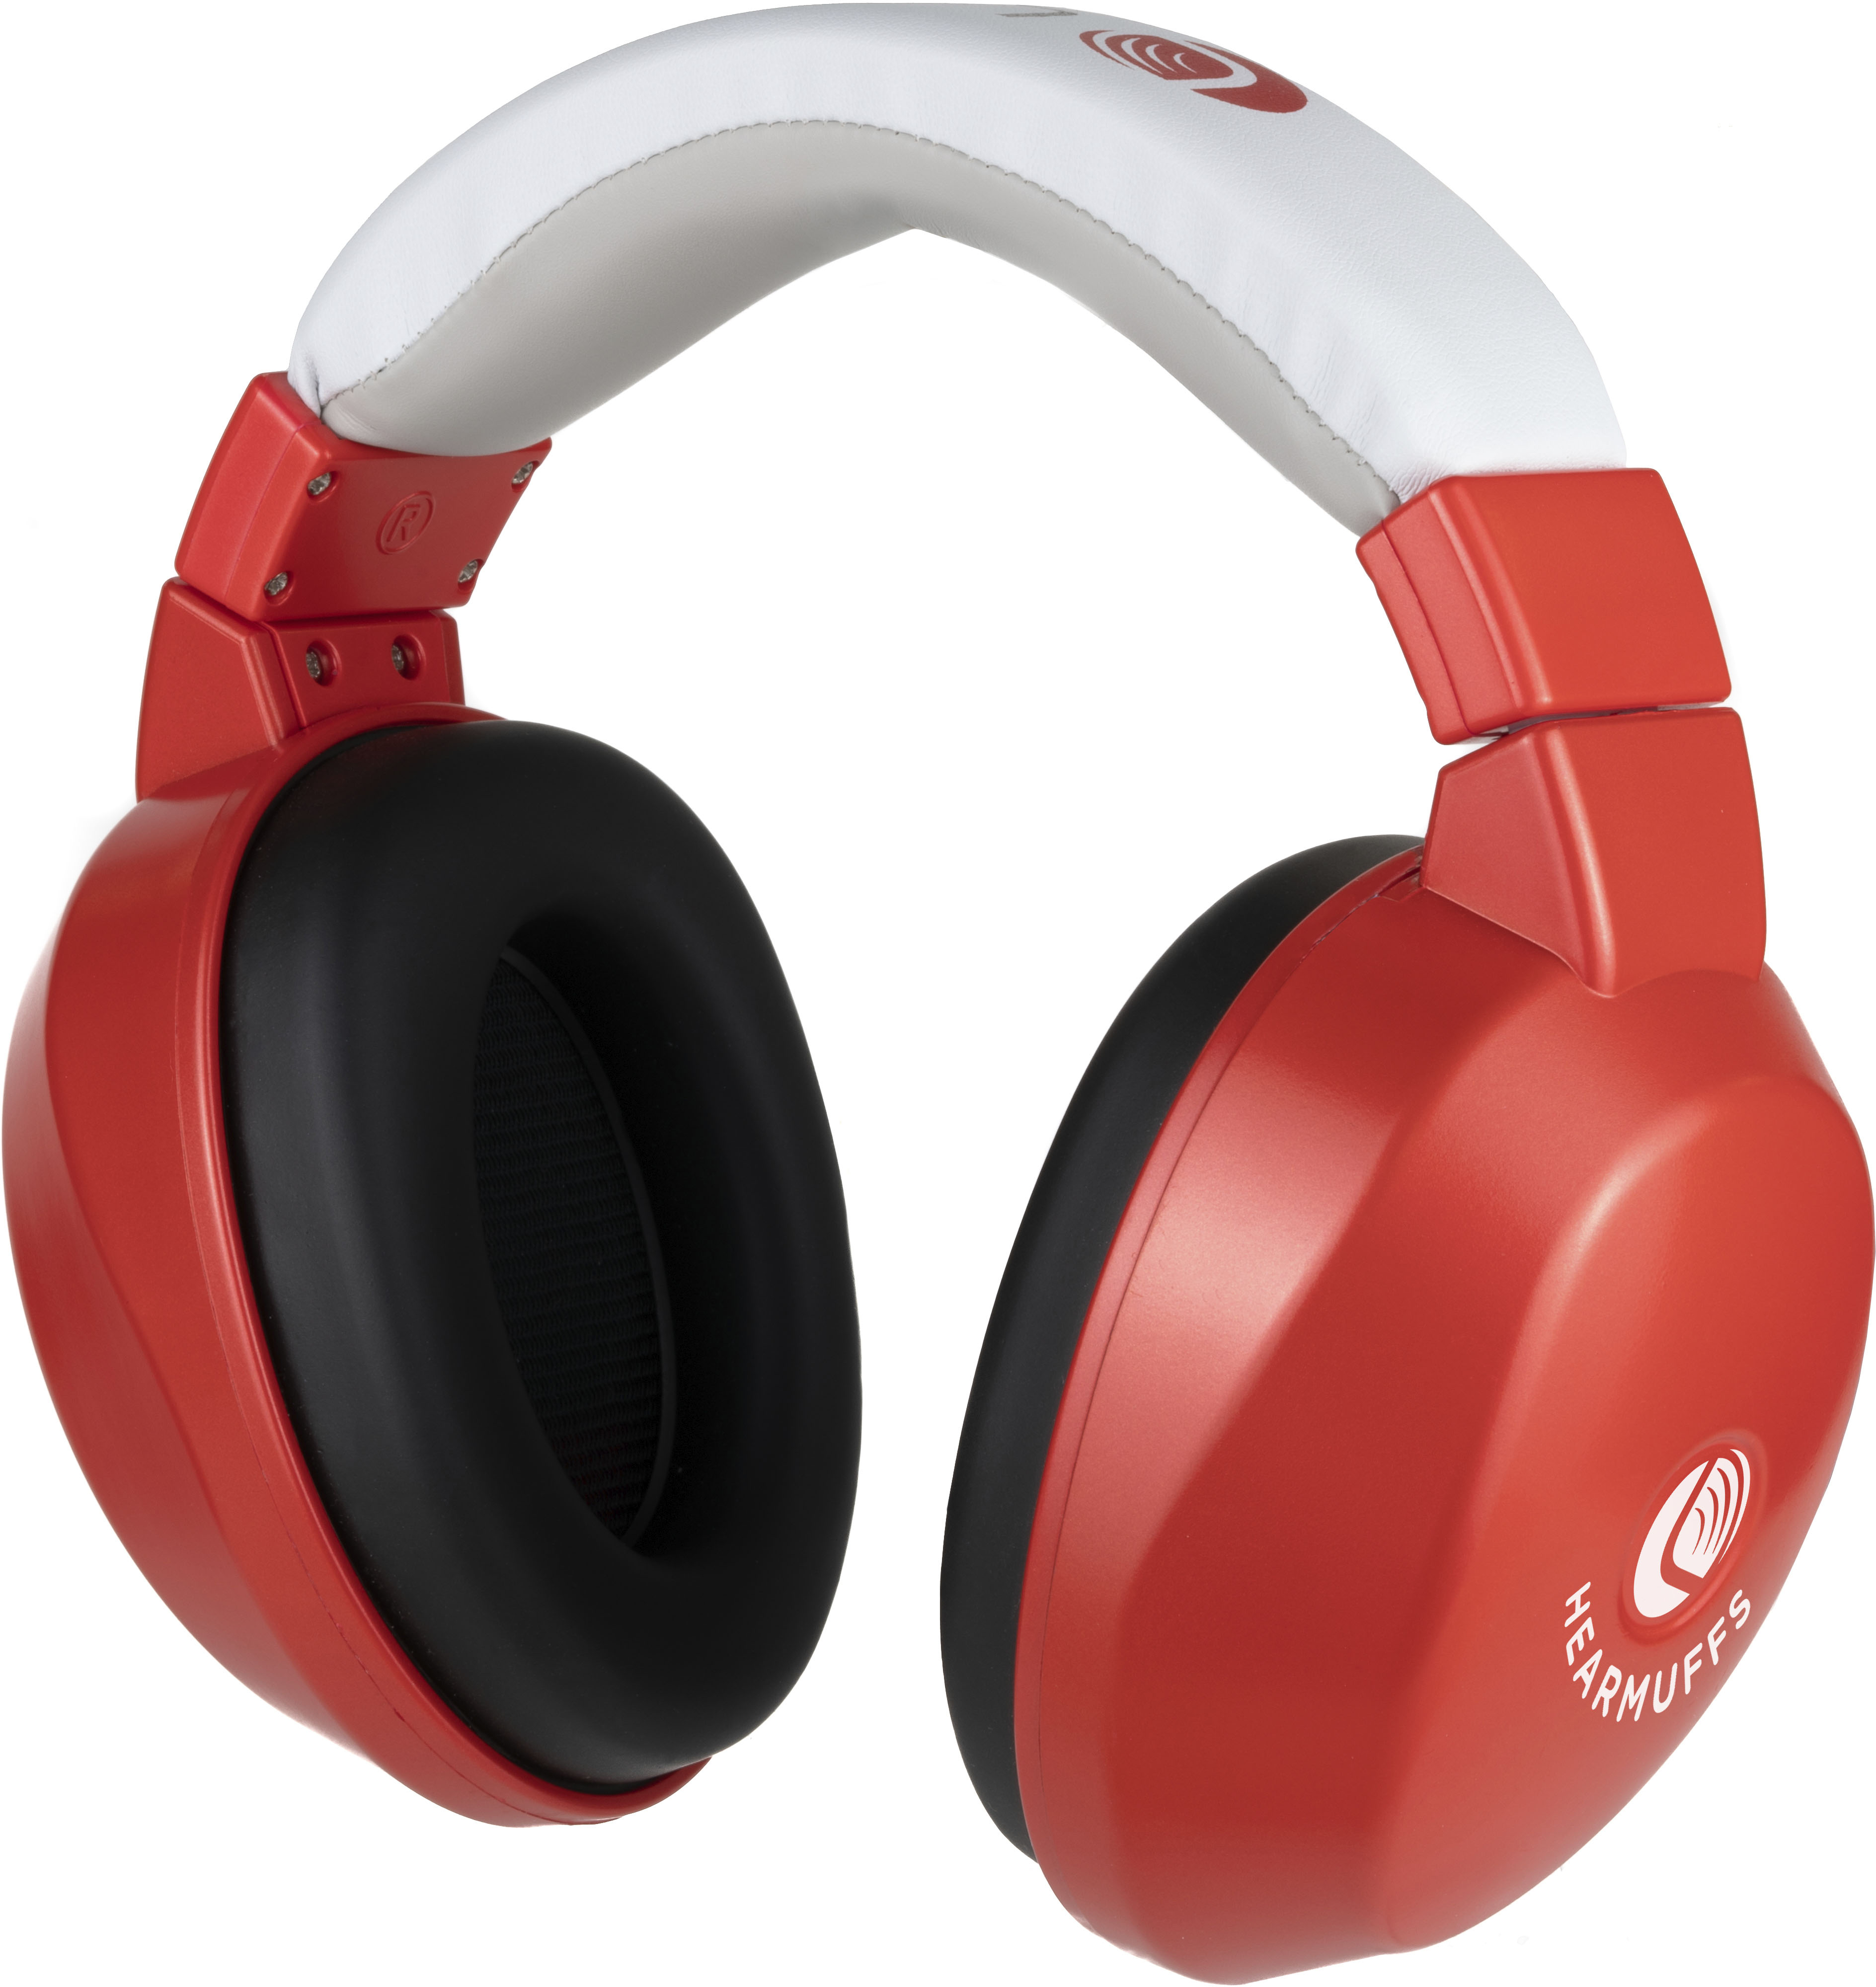 Left View: Lucid Hearing - Bluetooth HearMuffs for Children - Hearing Protection Ear Muffs Ideal for Kids 5-10 Years Old - RED